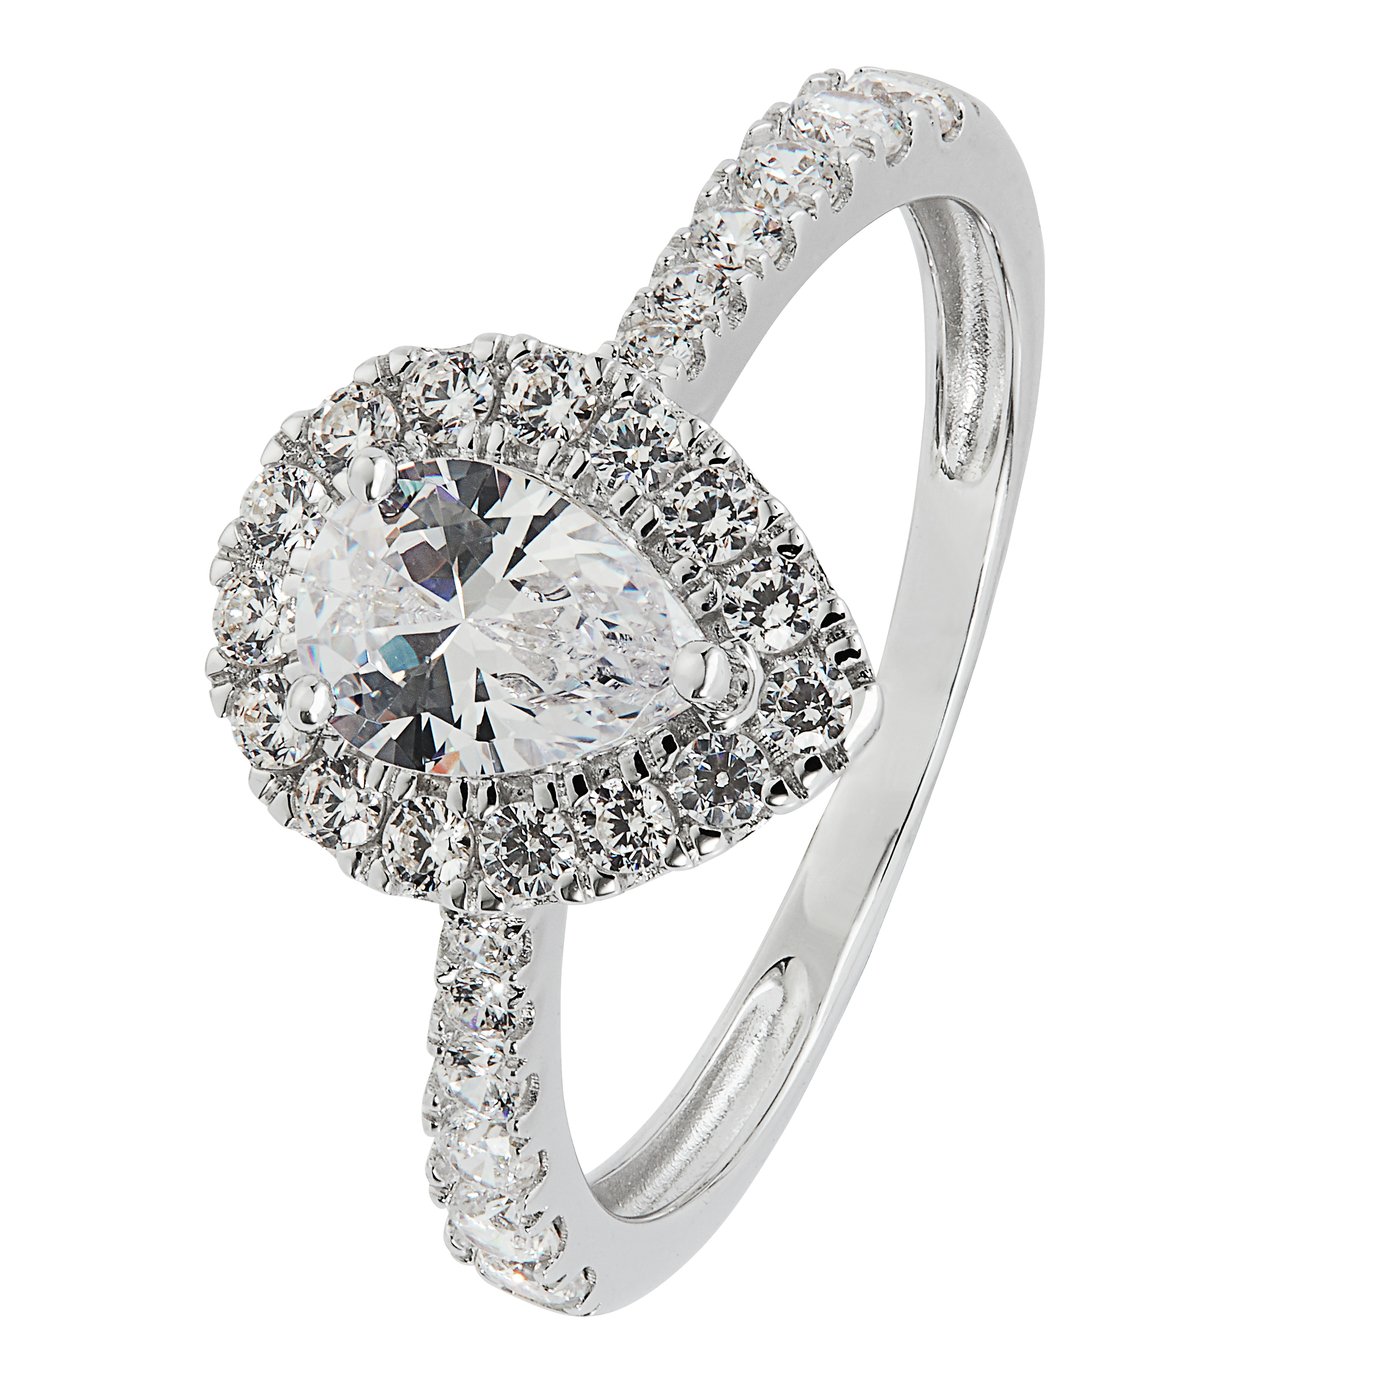 Revere 9ct White Gold Cubic Zirconia Halo Engagement Ring O